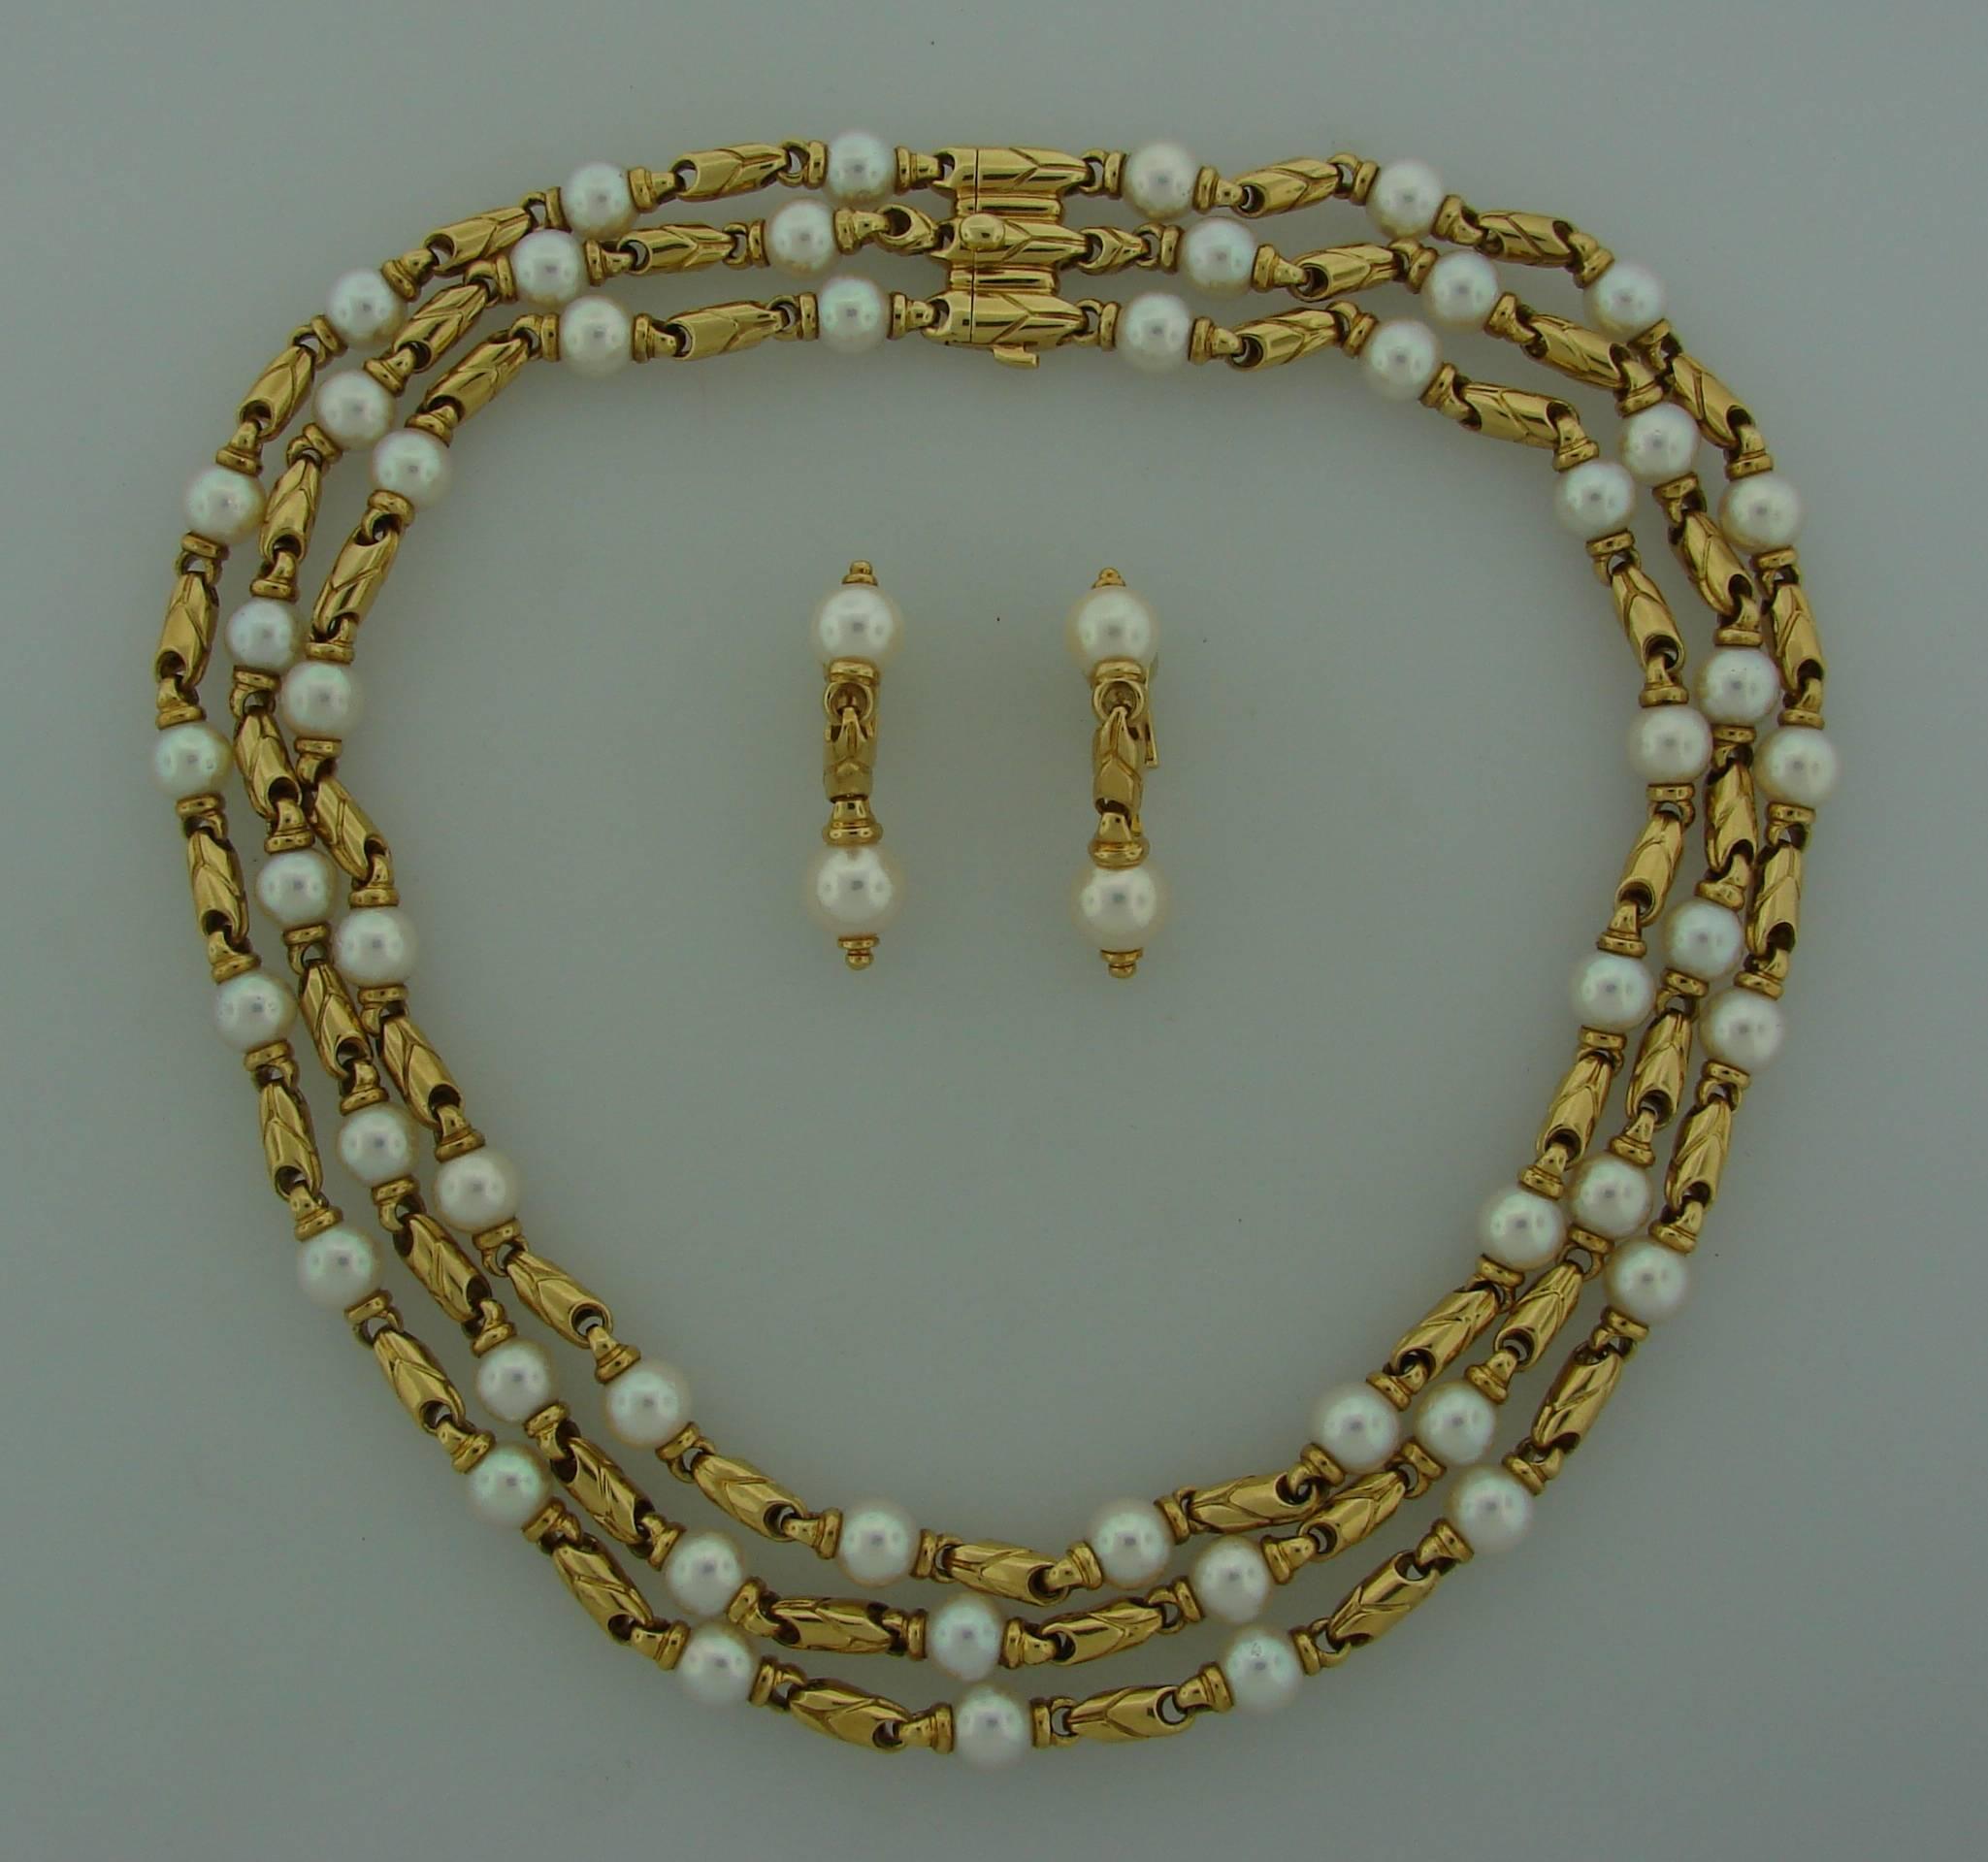 Gorgeous set consisting of a necklace and a pair of earrings created by Bulgari in Italy at the end of 1980's. Made of 18k yellow gold and features beautiful Akoya pearls. The pearls have lovely white color and beautiful luster. They measure in